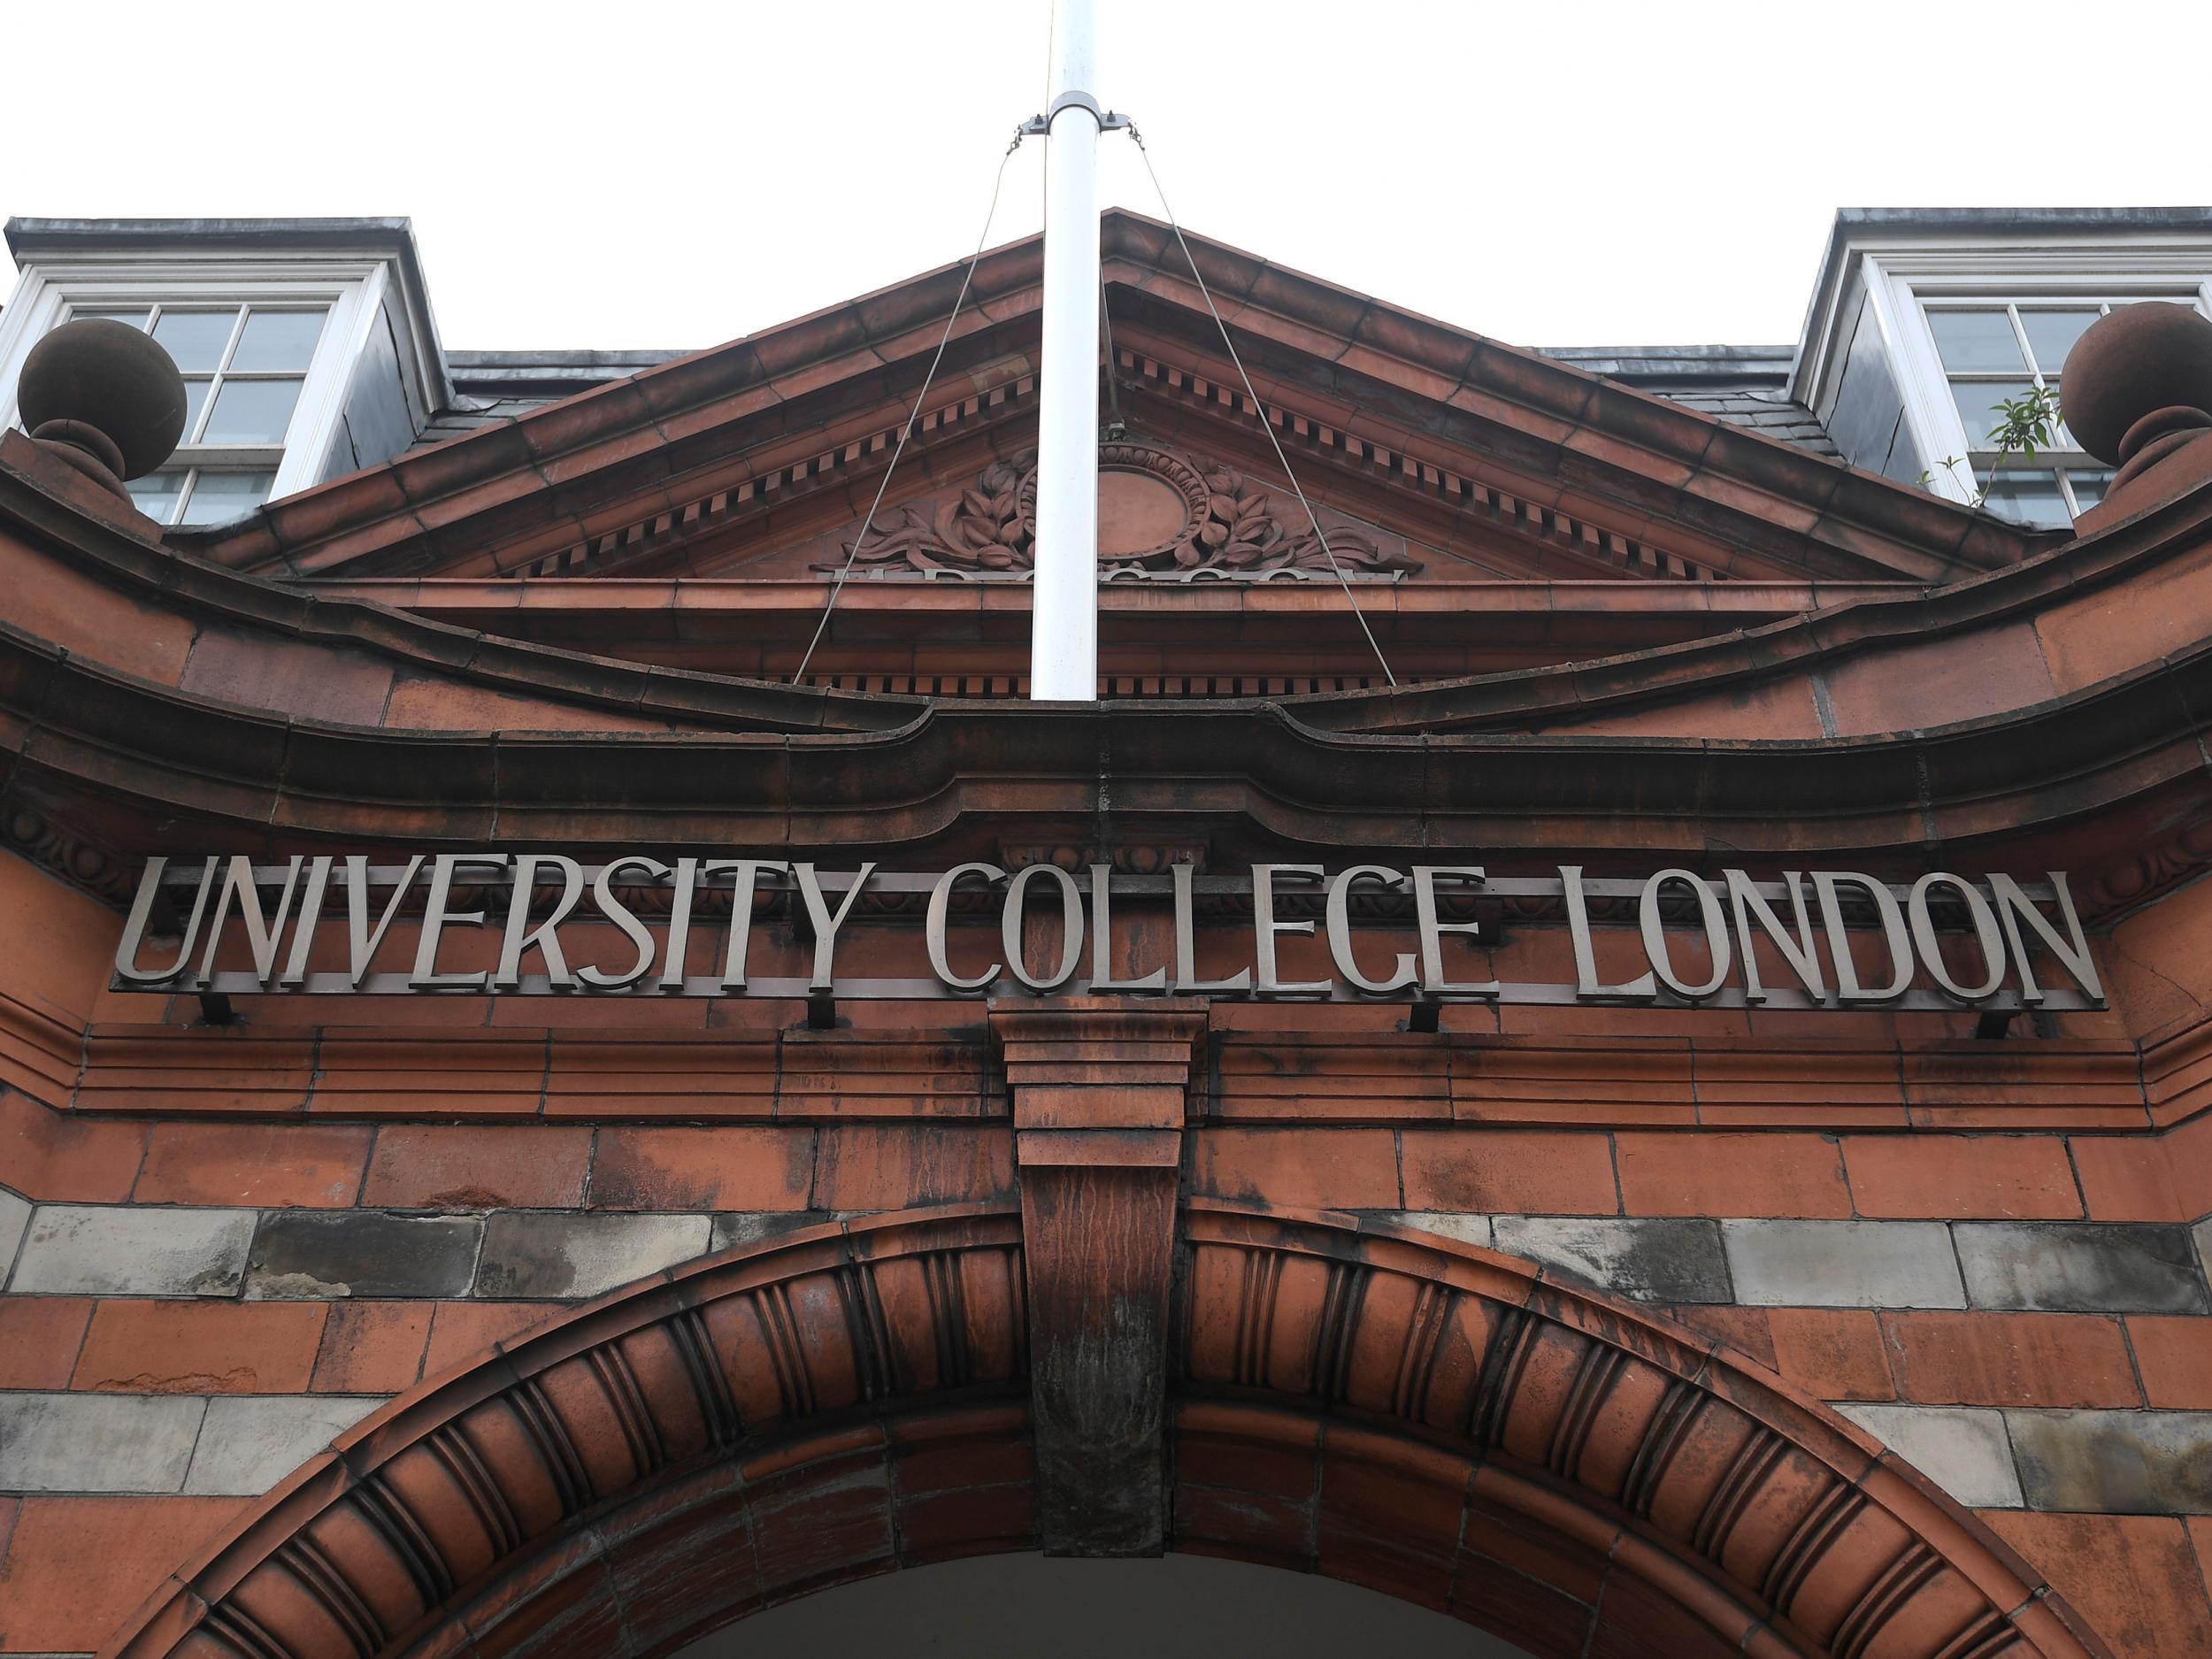 Outsourced workers are expected to be striking at the University of London on Tuesday